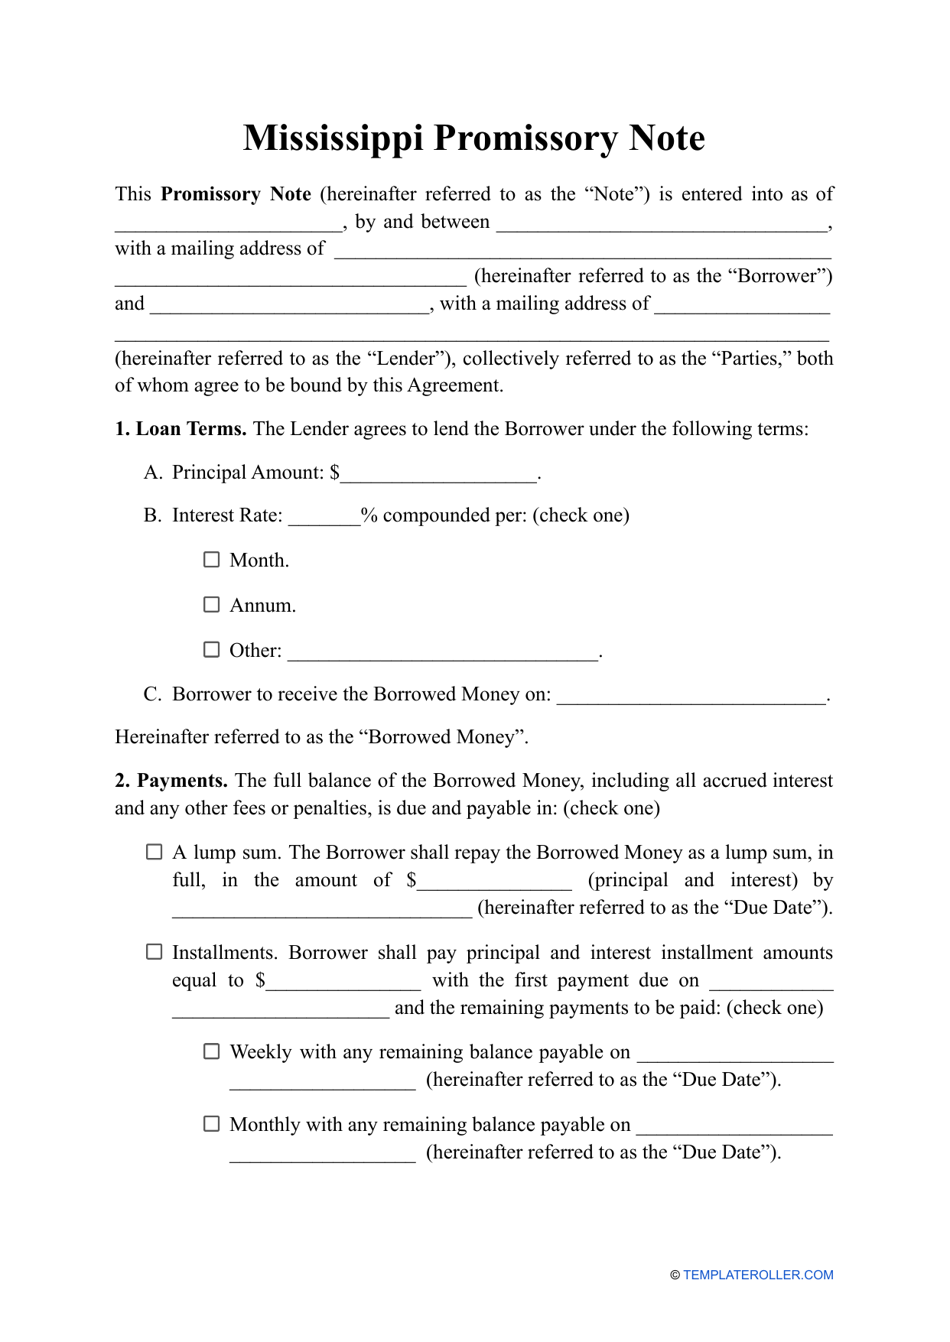 Mississippi Promissory Note Template Preview